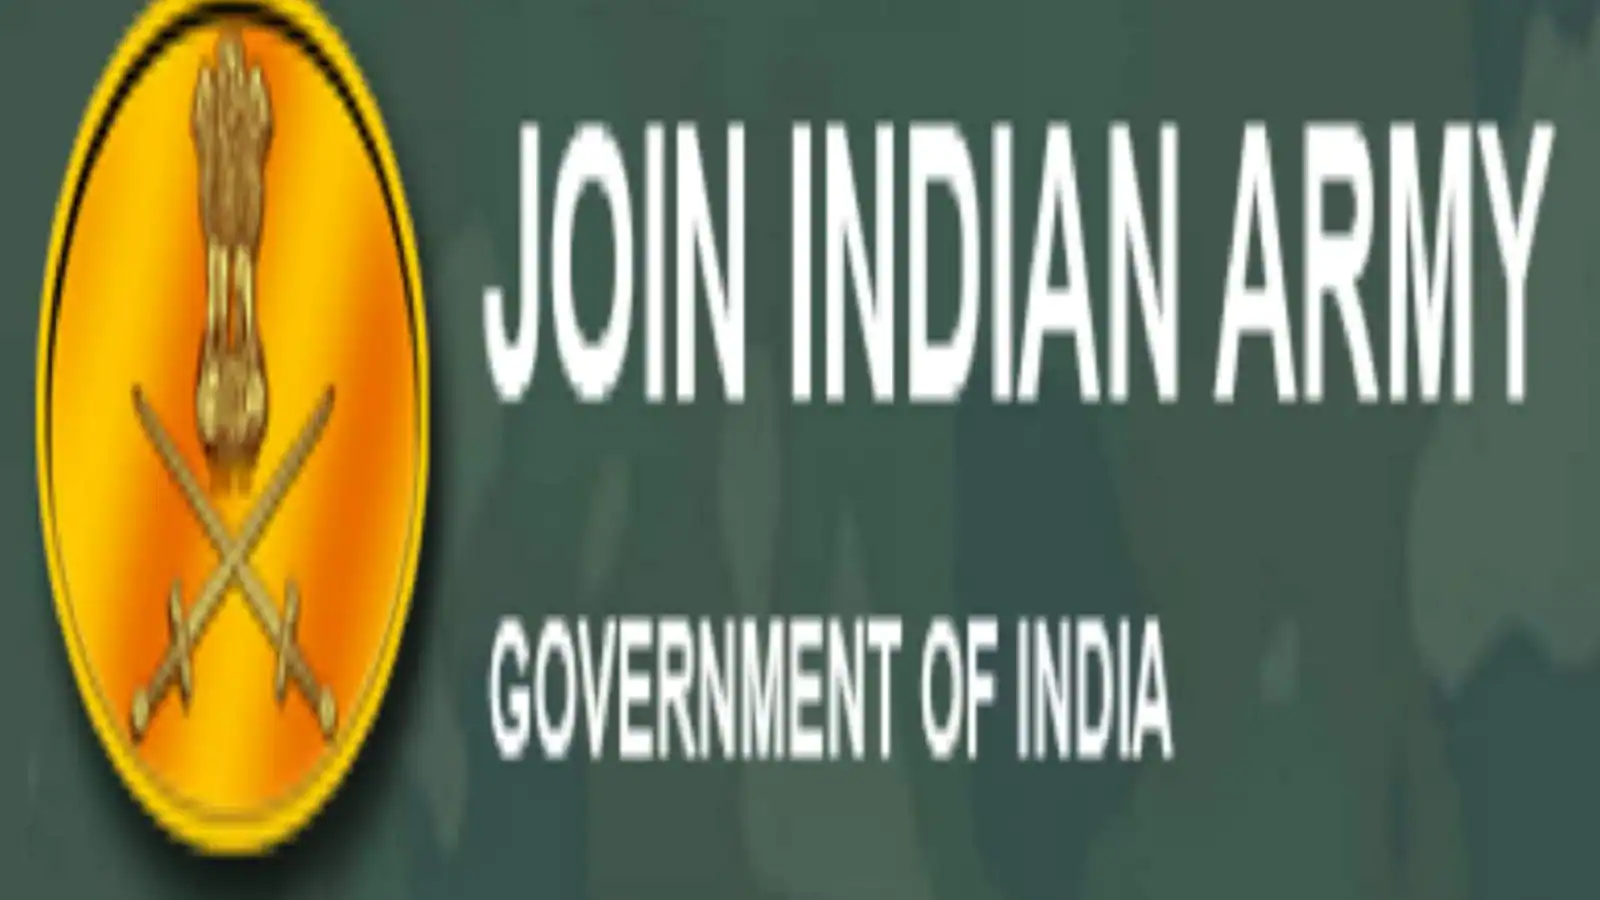 Join Indian Army 2022: Apply for NCC Special Entry Scheme, details here